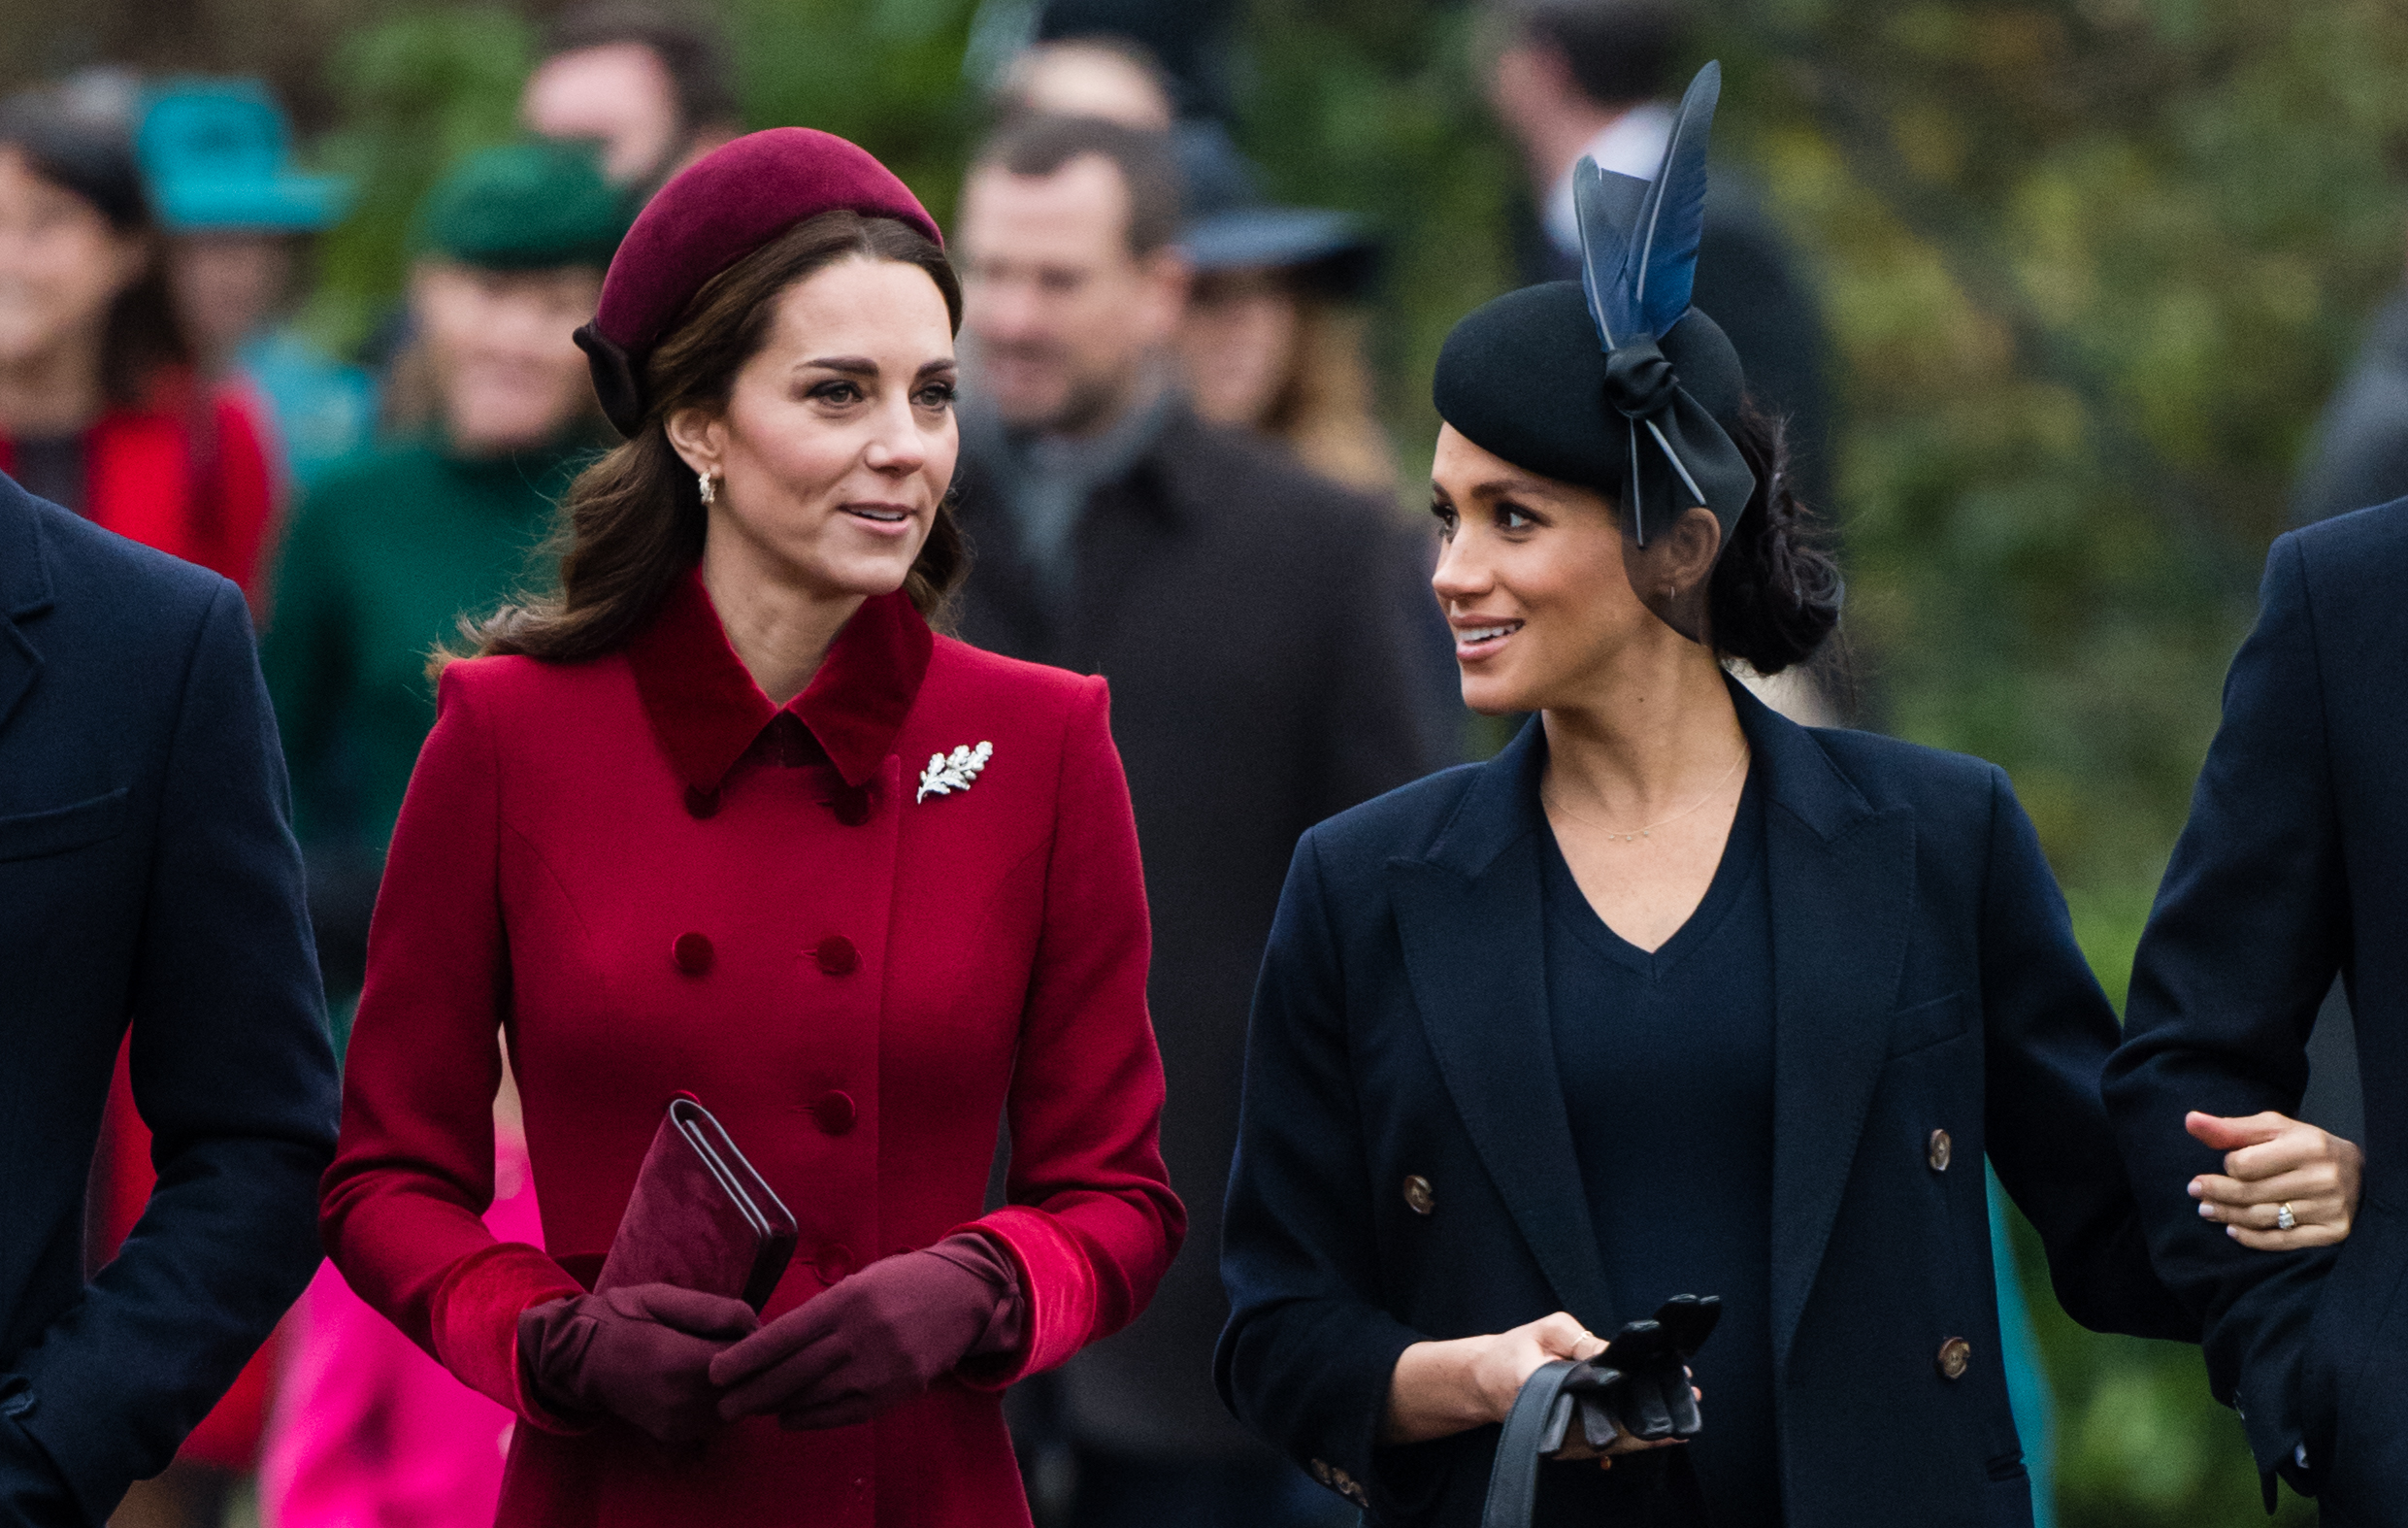 The Princess of Wales and Duchess Meghan at Christmas Day Church service on the Sandringham estate on December 25, 2018, in King's Lynn, England | Source: Getty Images